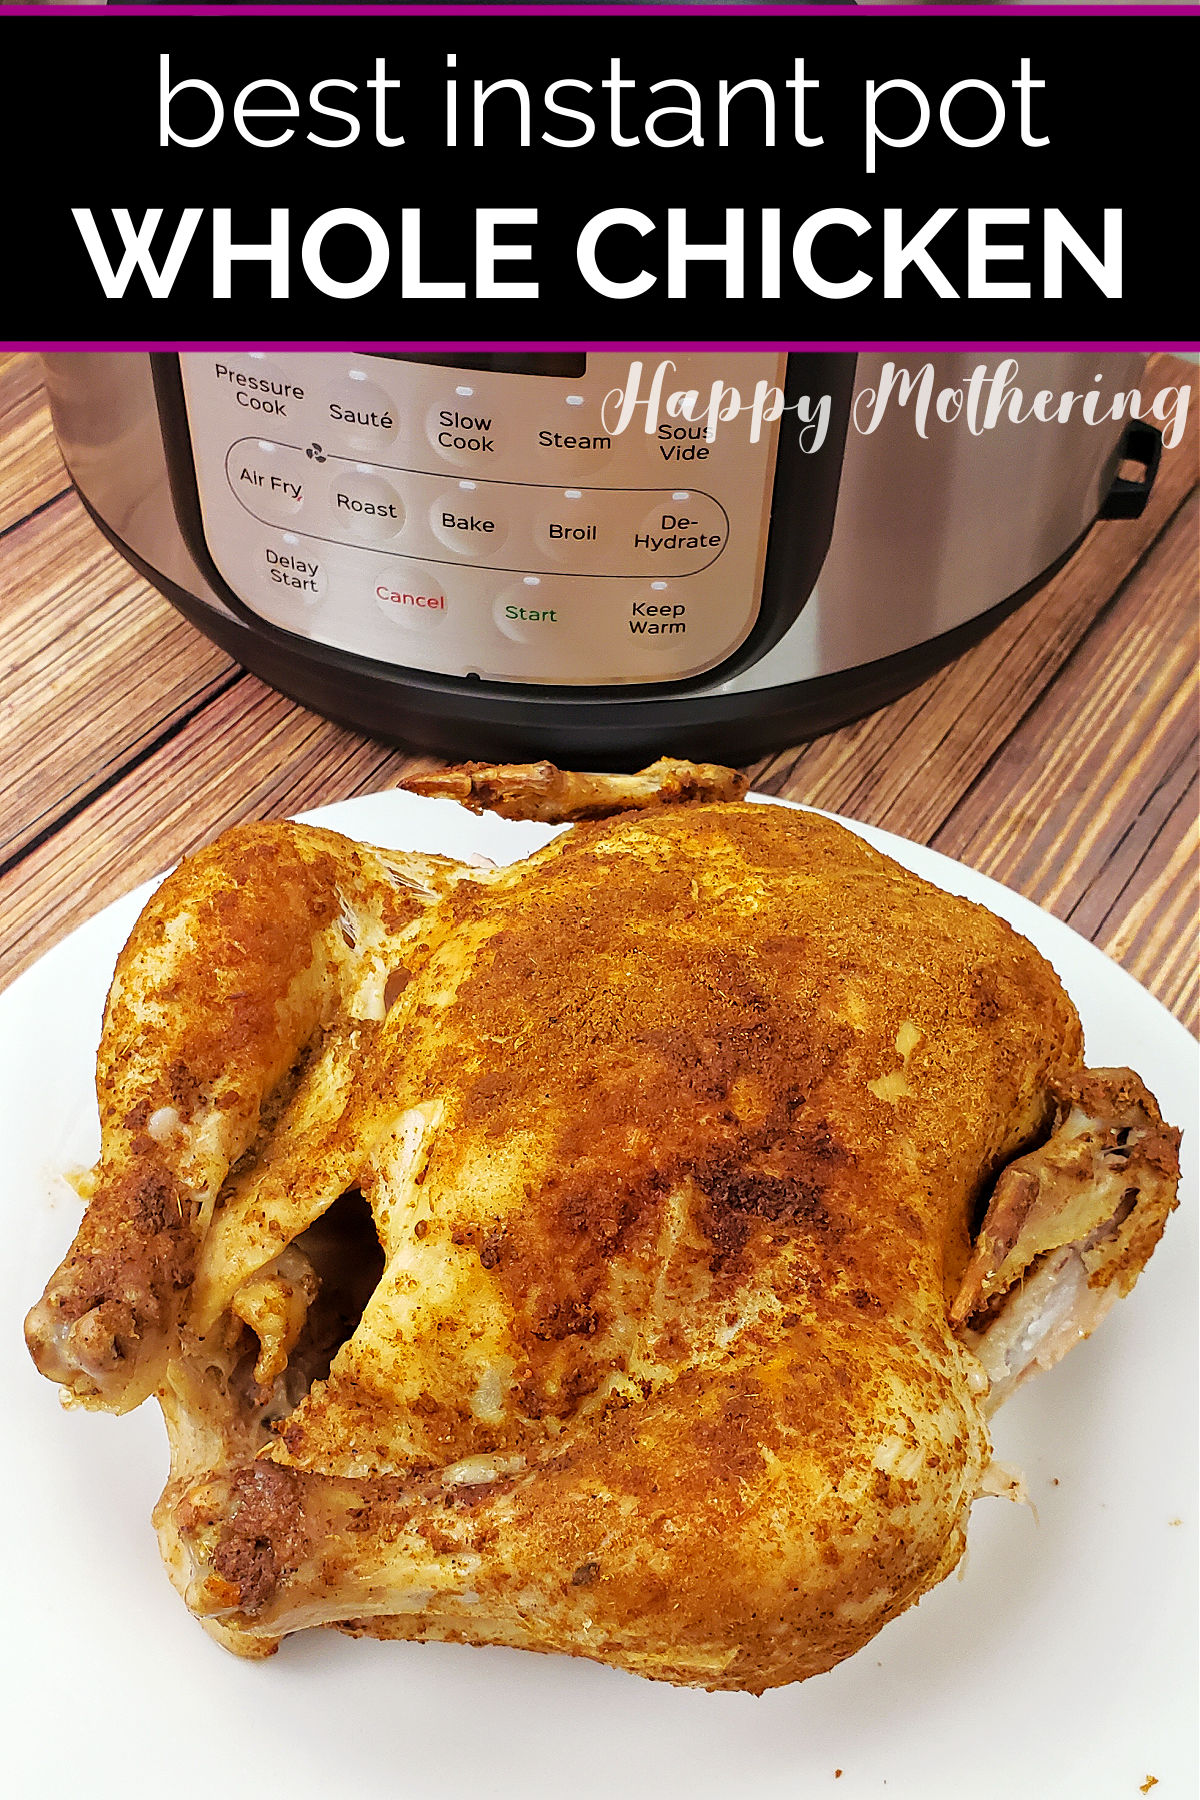 Whole chicken with crispy skin on a white serving platter in front of the Instant Pot it was cooked in.